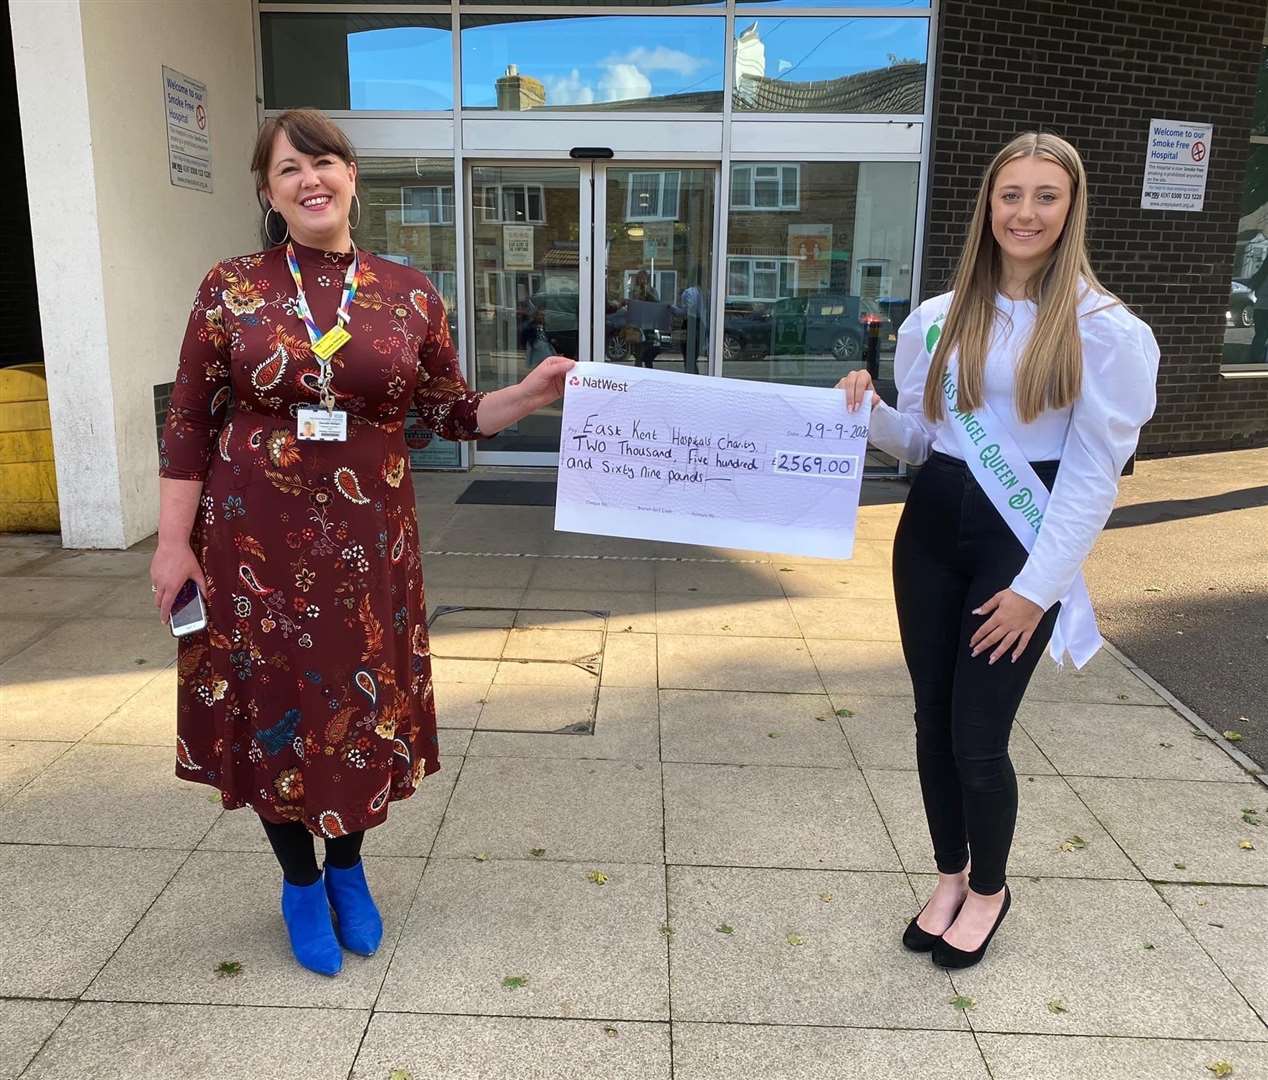 East Kent Hospitals Charity's fundraising and development officer Dee Neligan receives the cheque for £2,500 from Lara Lynch who set up an online pageant in memory of her granny Liz Masters